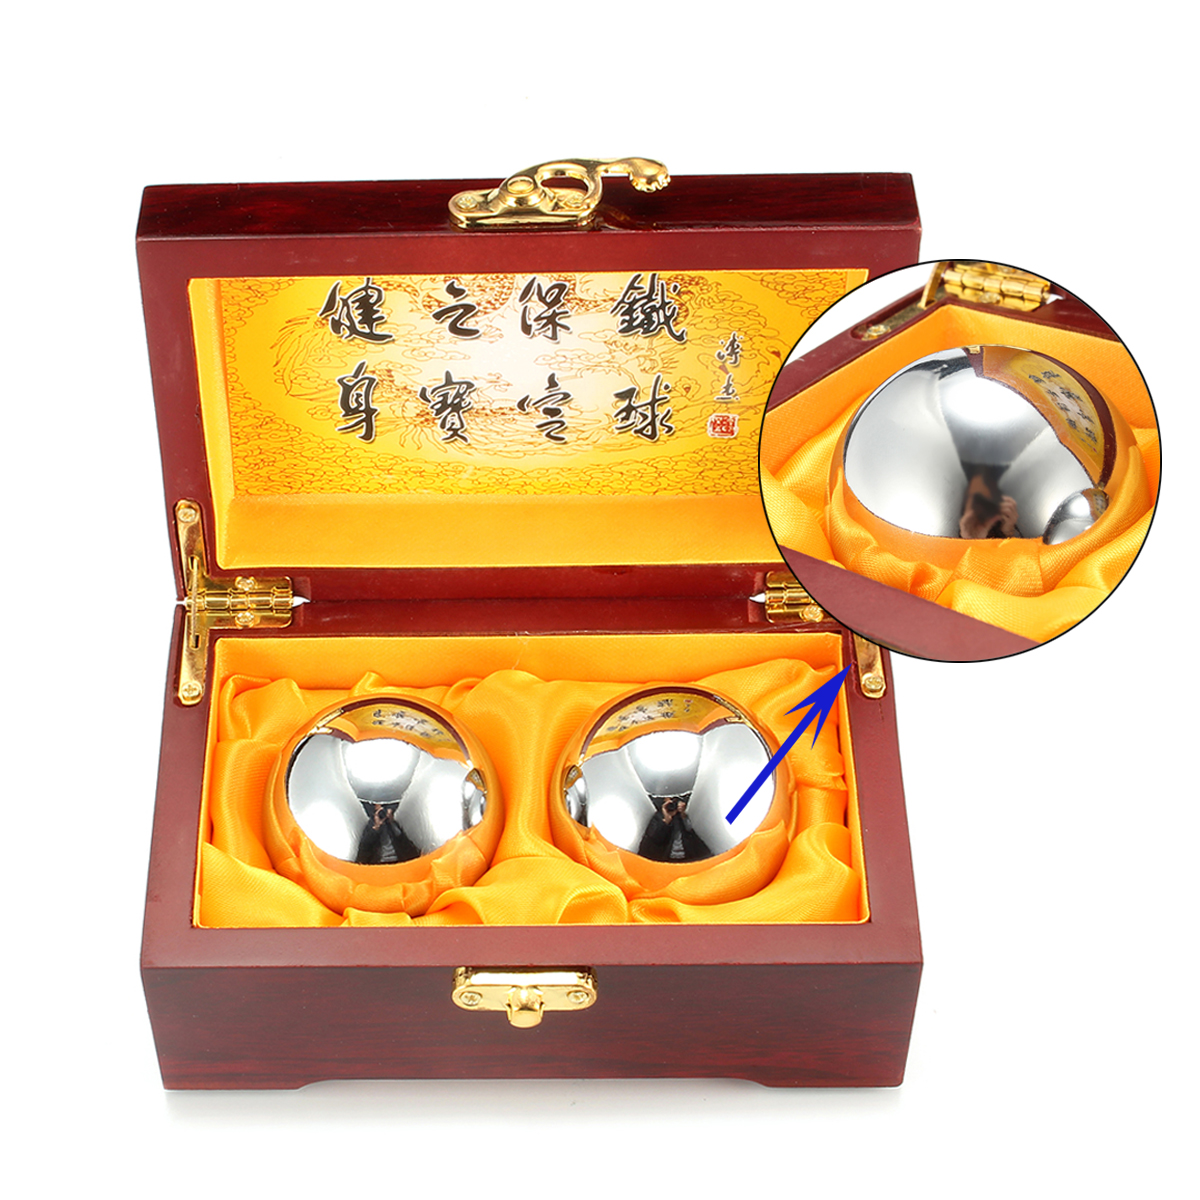 50mm-Chinese-Health-Exercise-Stress-Relaxation-Therapy-Chrome-Massage-Baoding-Ball-1122757